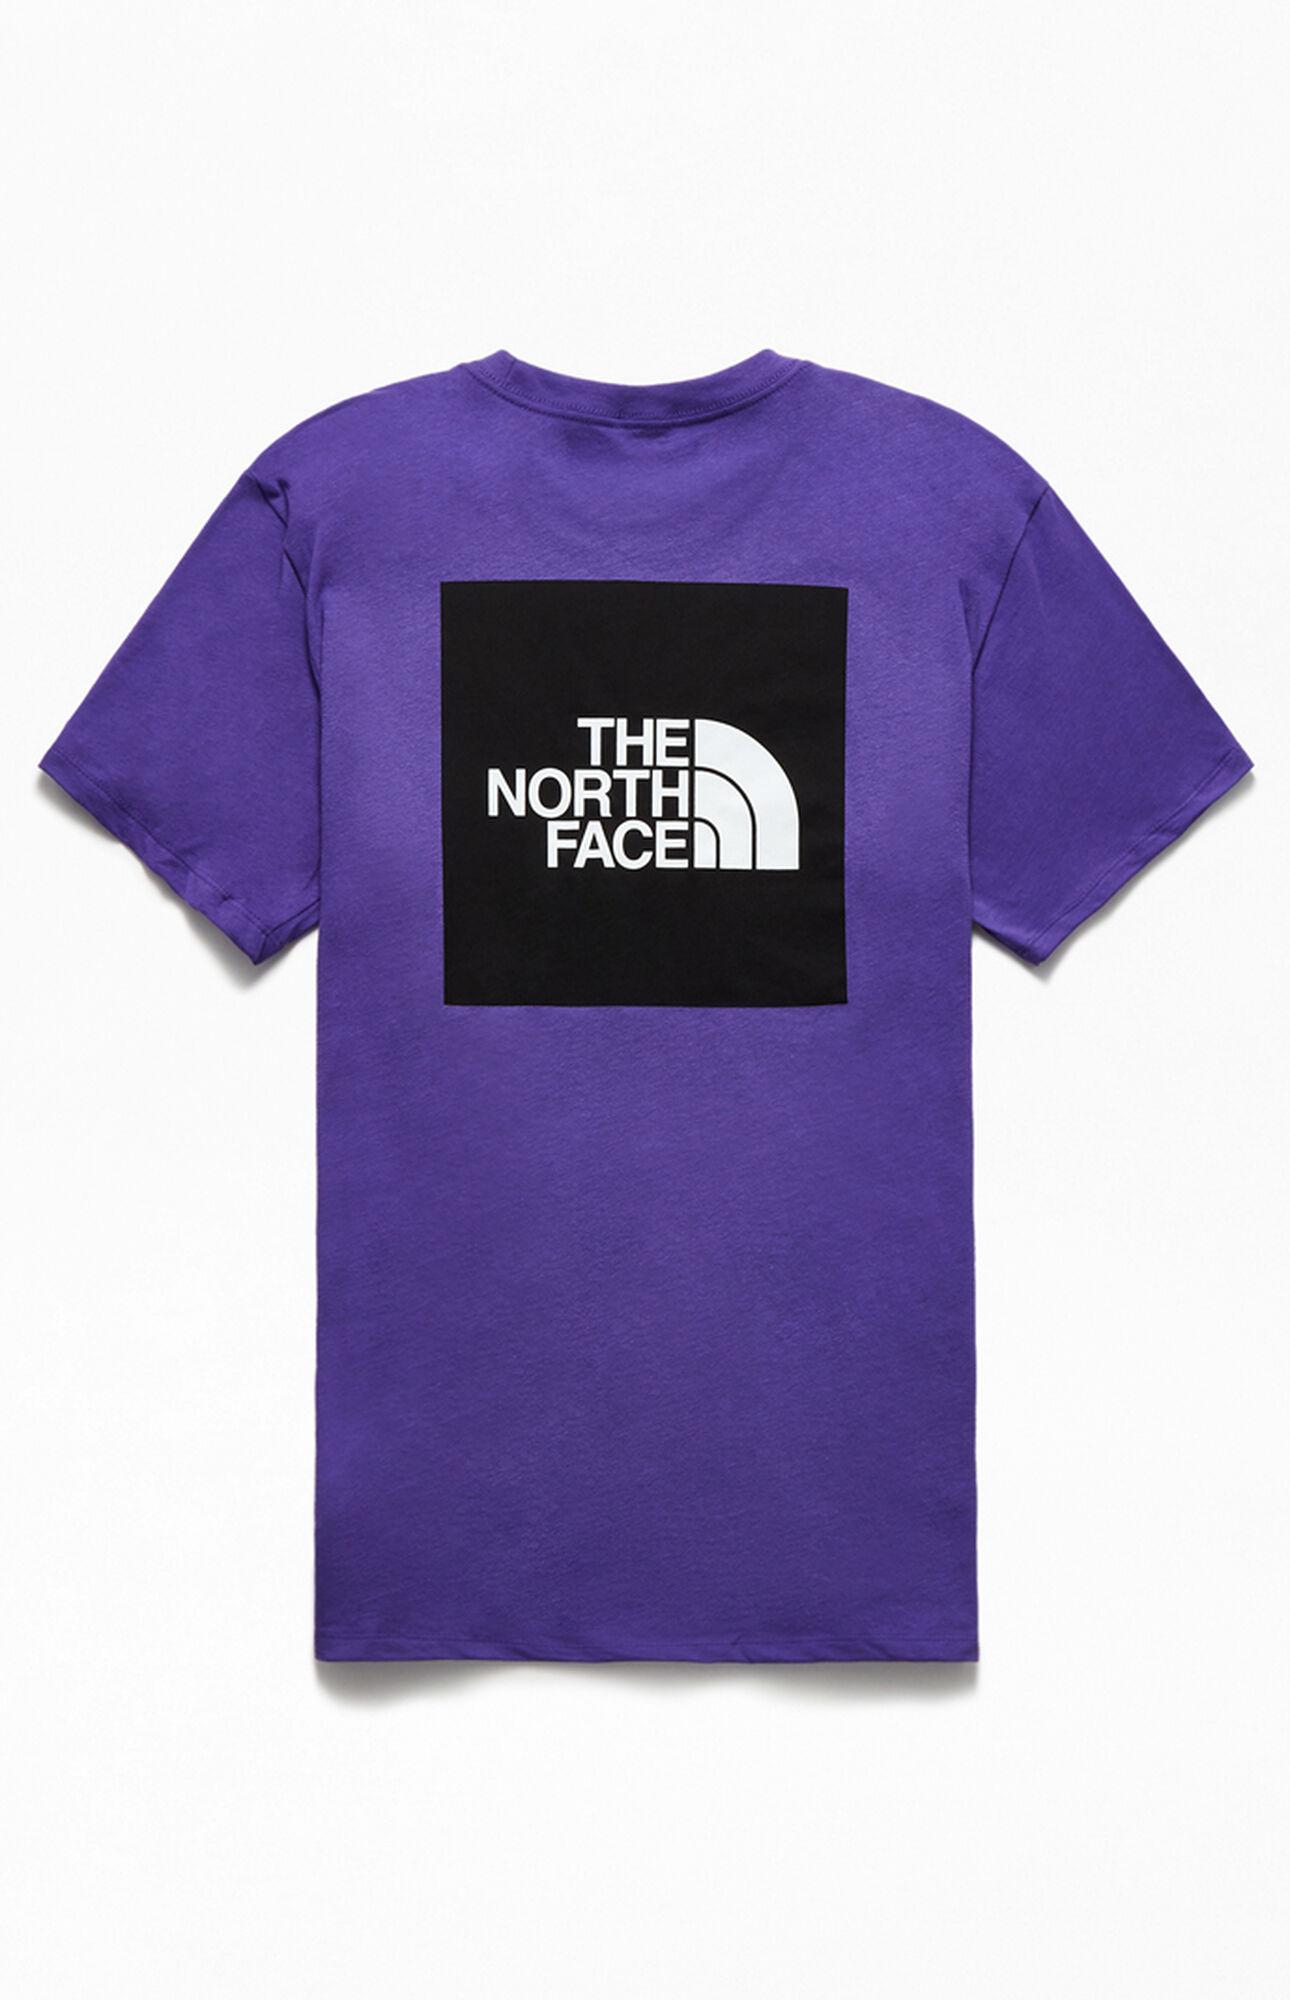 The North Face Purple Box Logo T-shirt for Men - Lyst